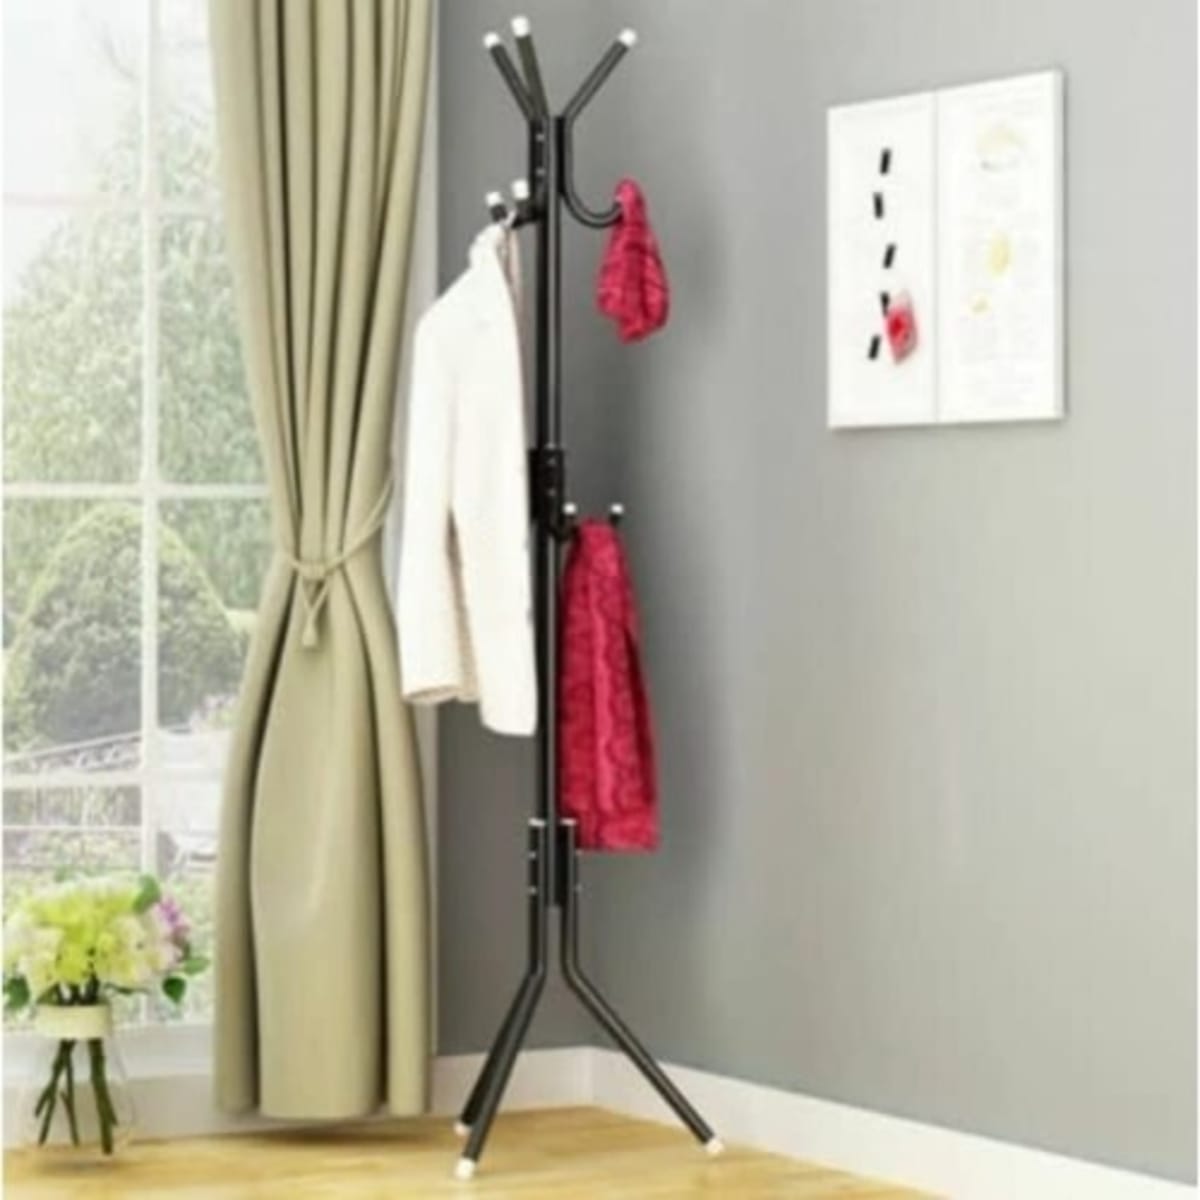 17 Hooks Wall Mounted Coat Hat Rack Expandable Wooden Pegs for Bags Keys  Hanging | eBay